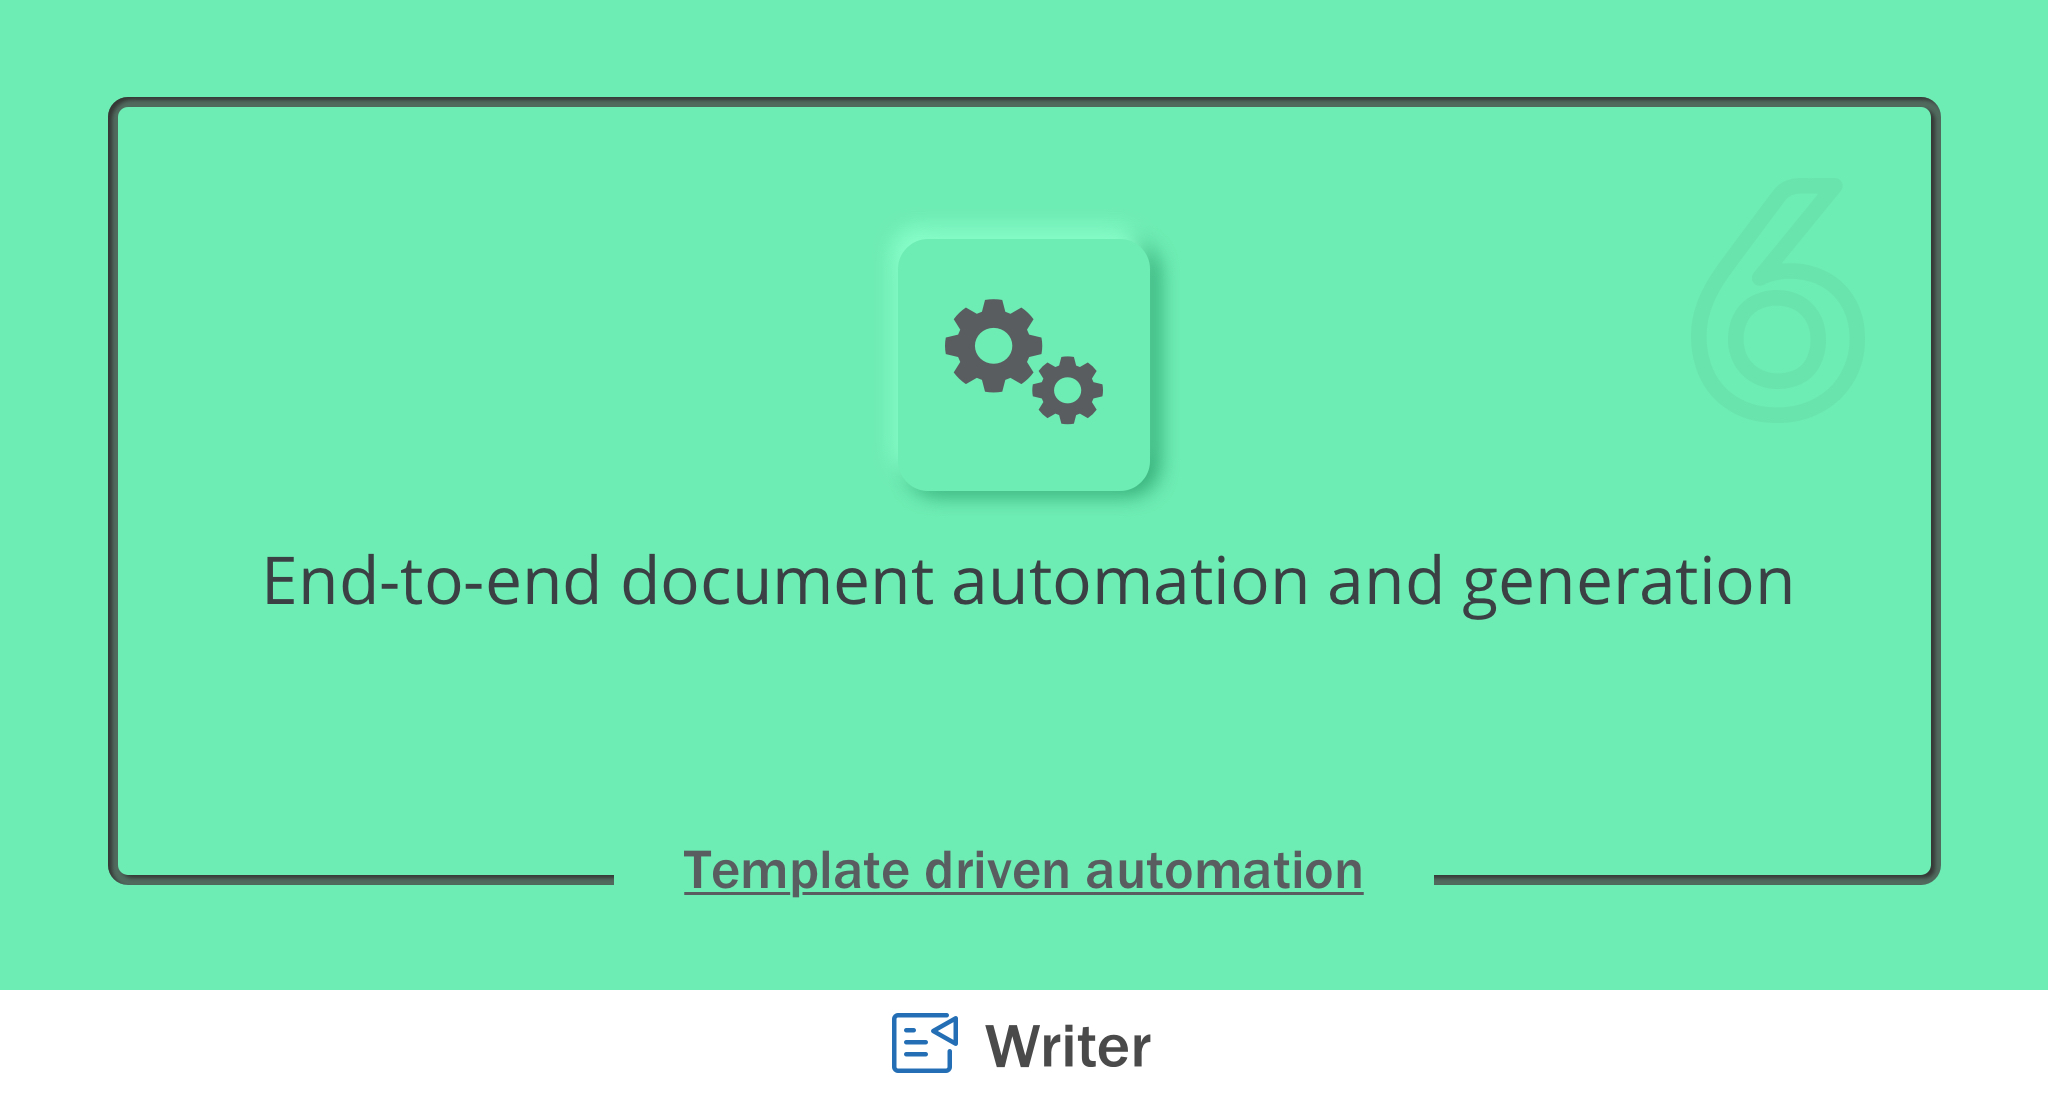 Introducing template-driven document automation in Writer